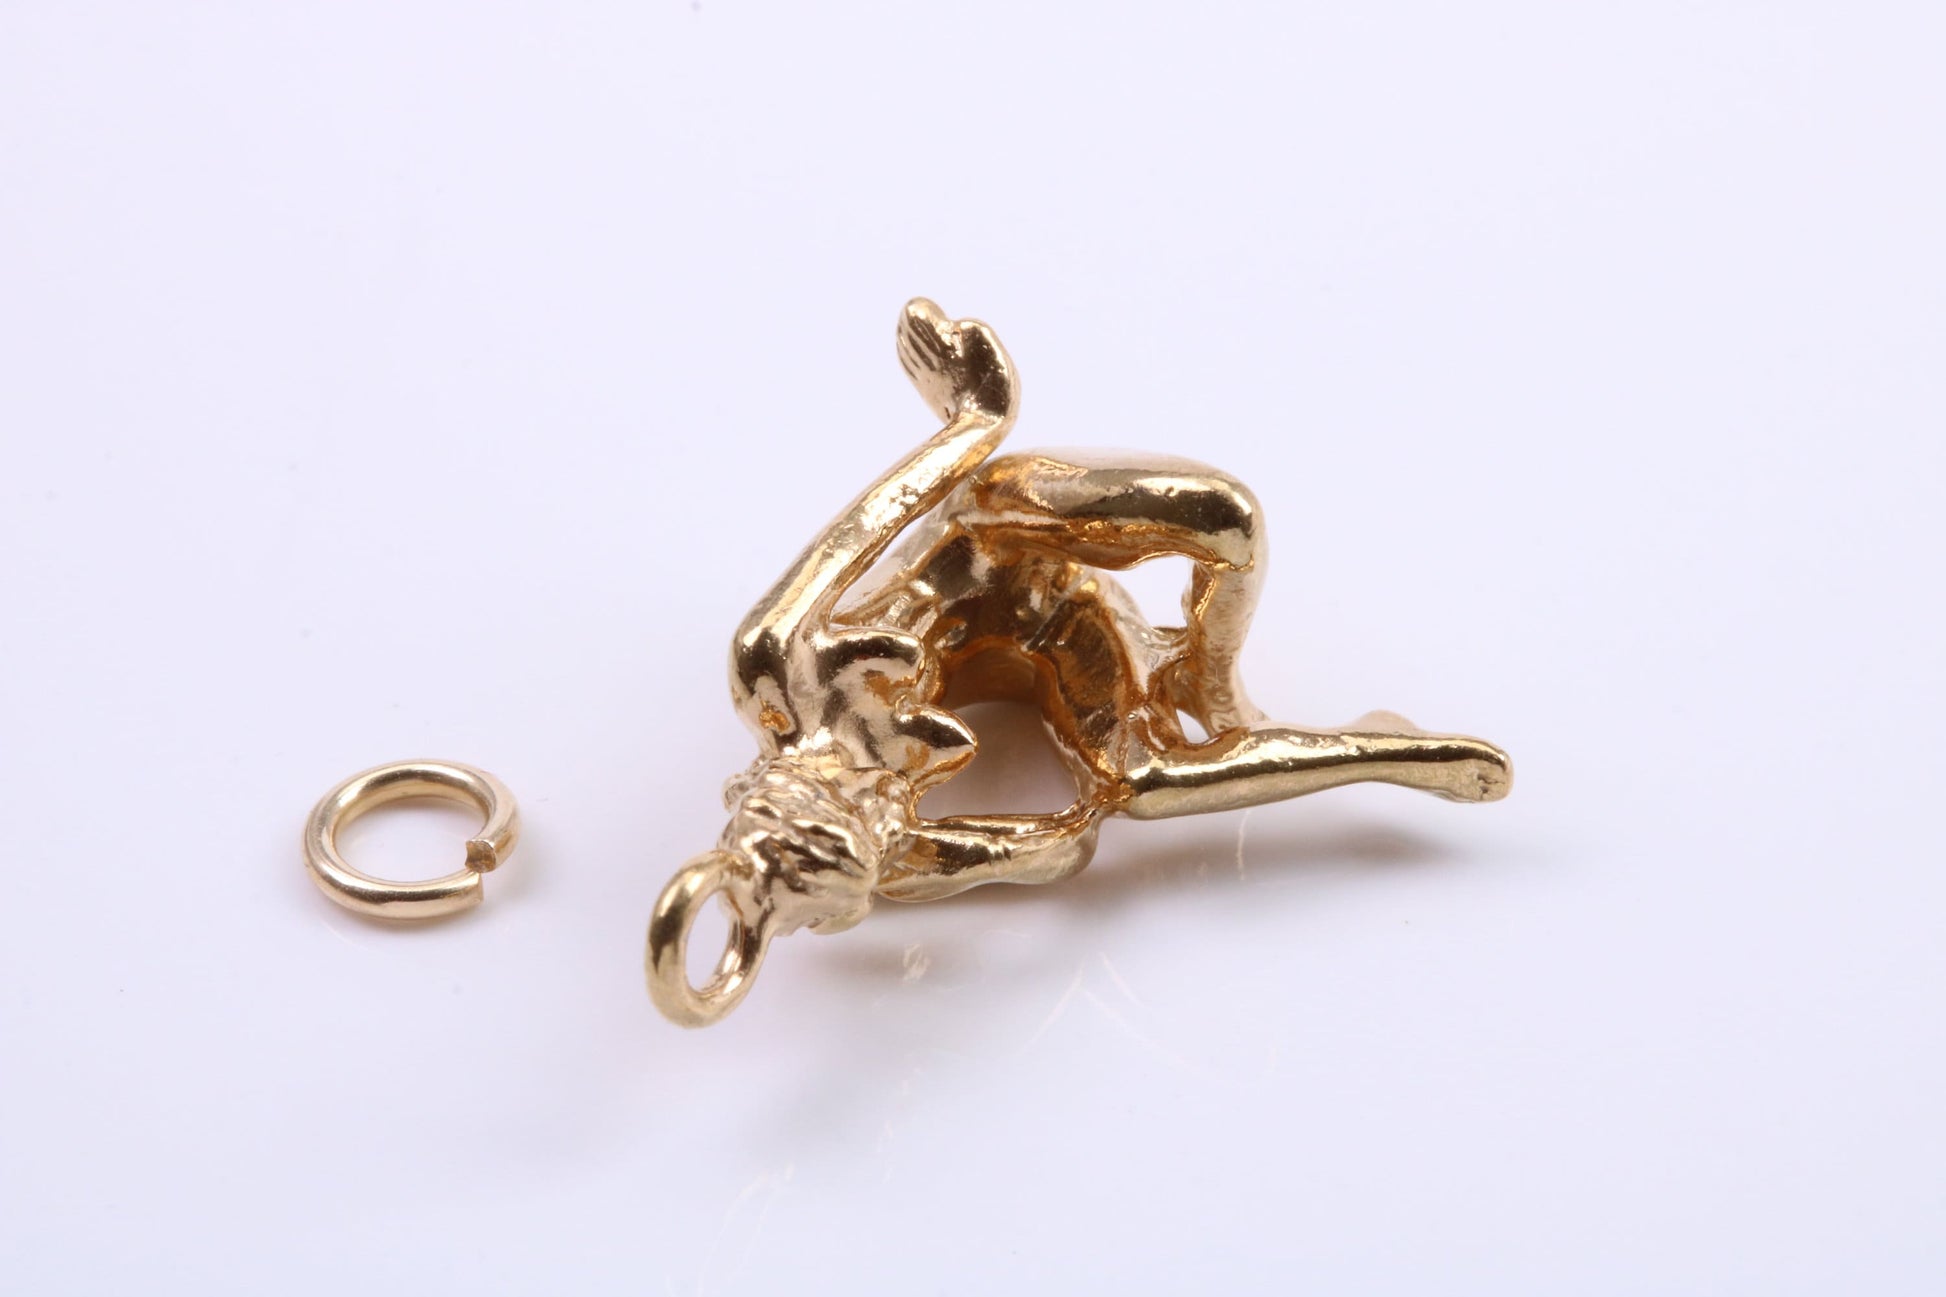 Virgo Zodiac Sign Charm, Traditional Charm, Made from Solid 9ct Yellow Gold, British Hallmarked, Complete with Attachment Link